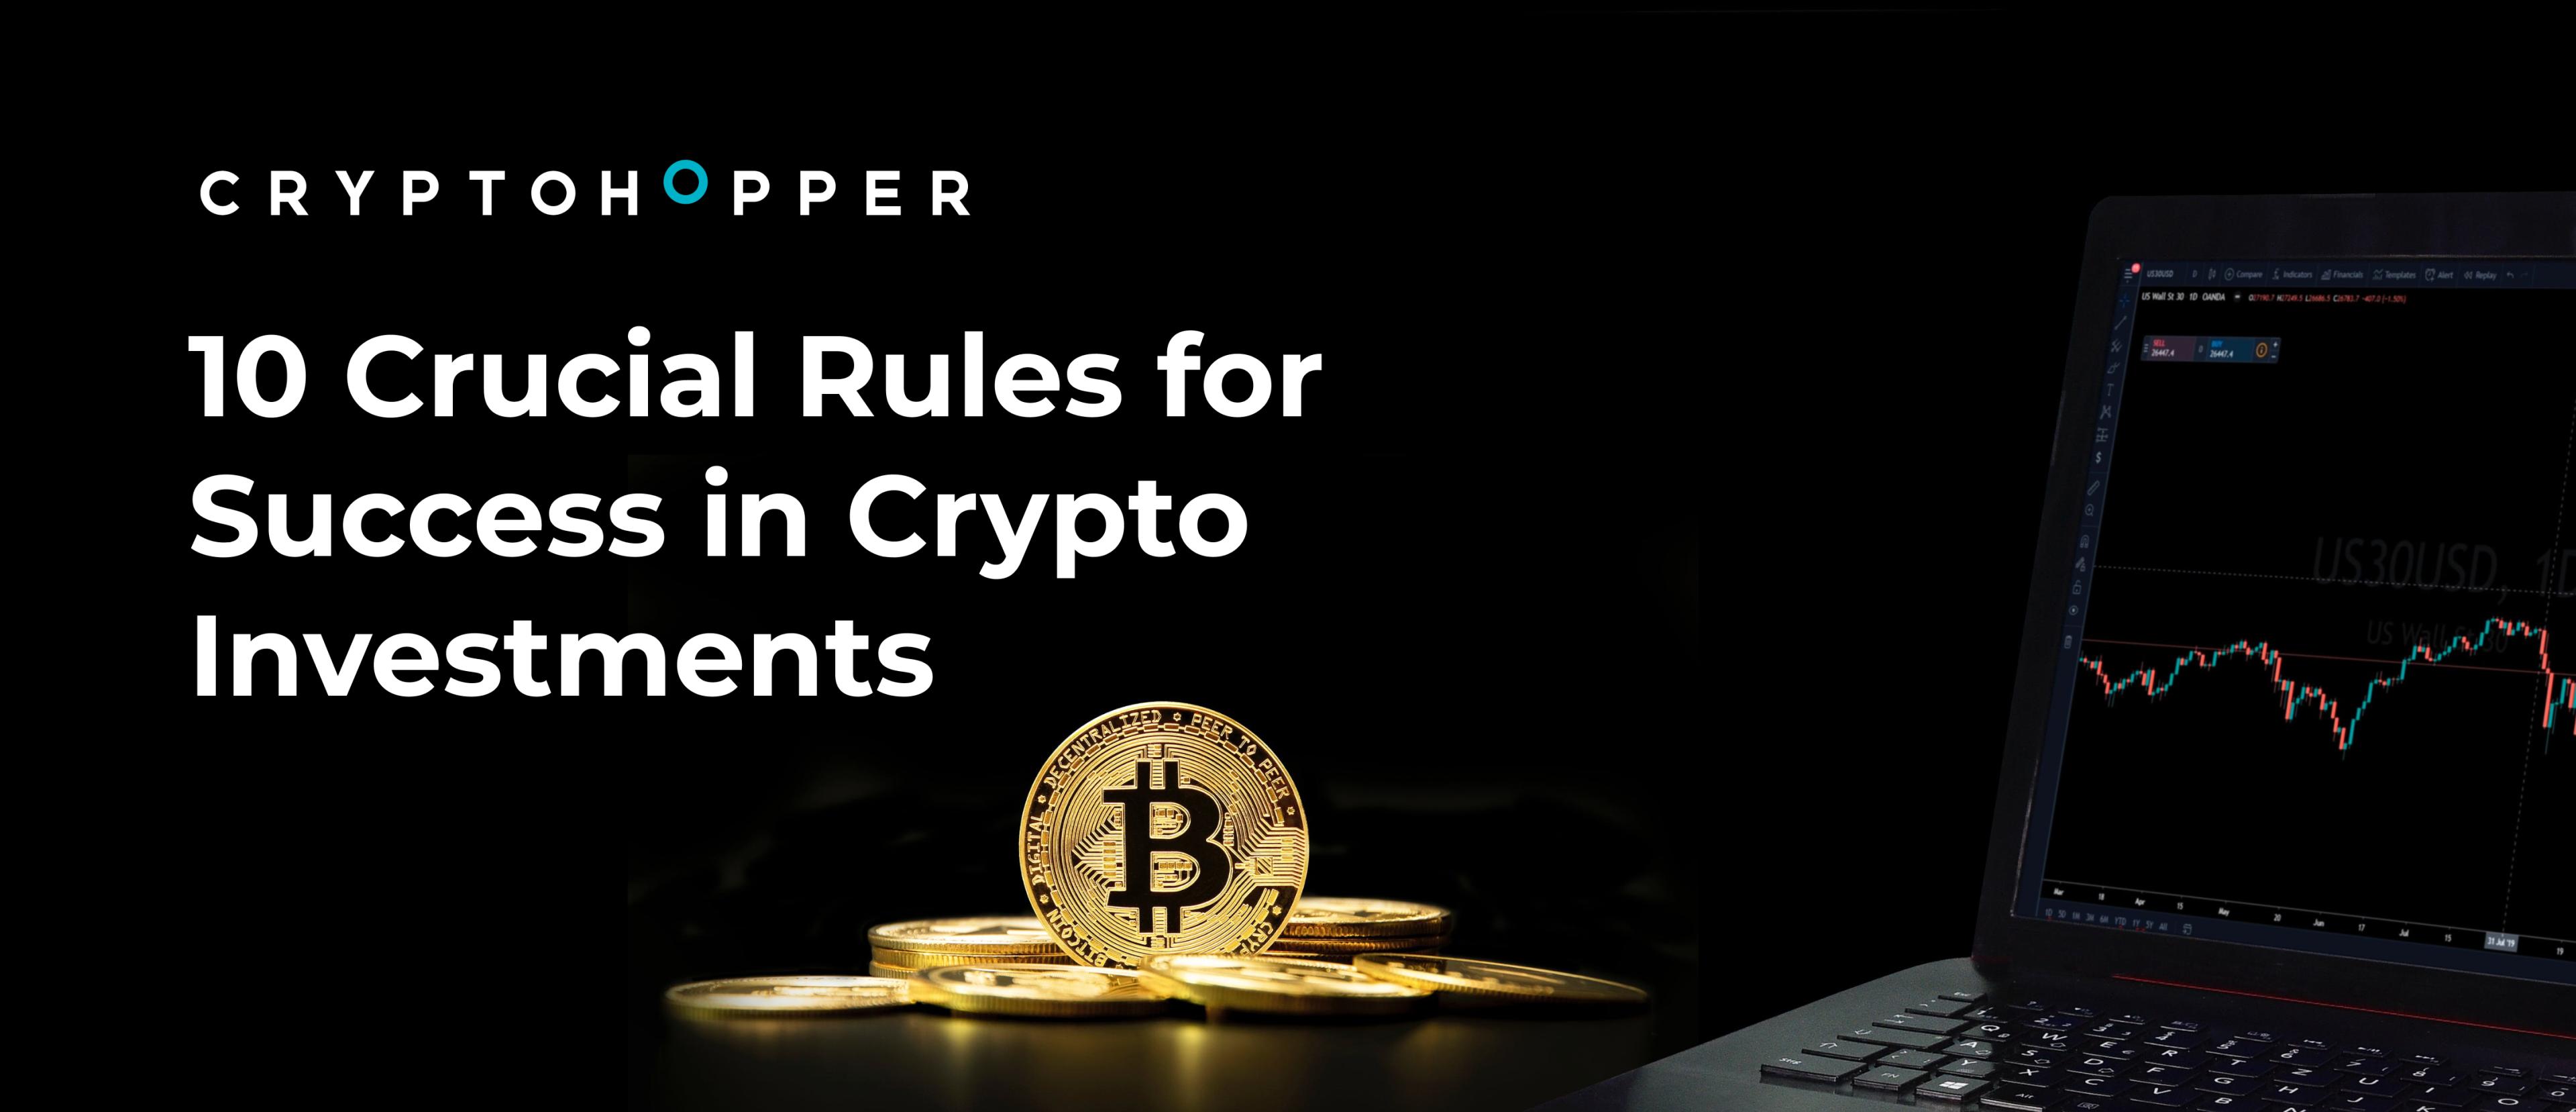 Ten Crucial Rules for Success in Crypto Investments